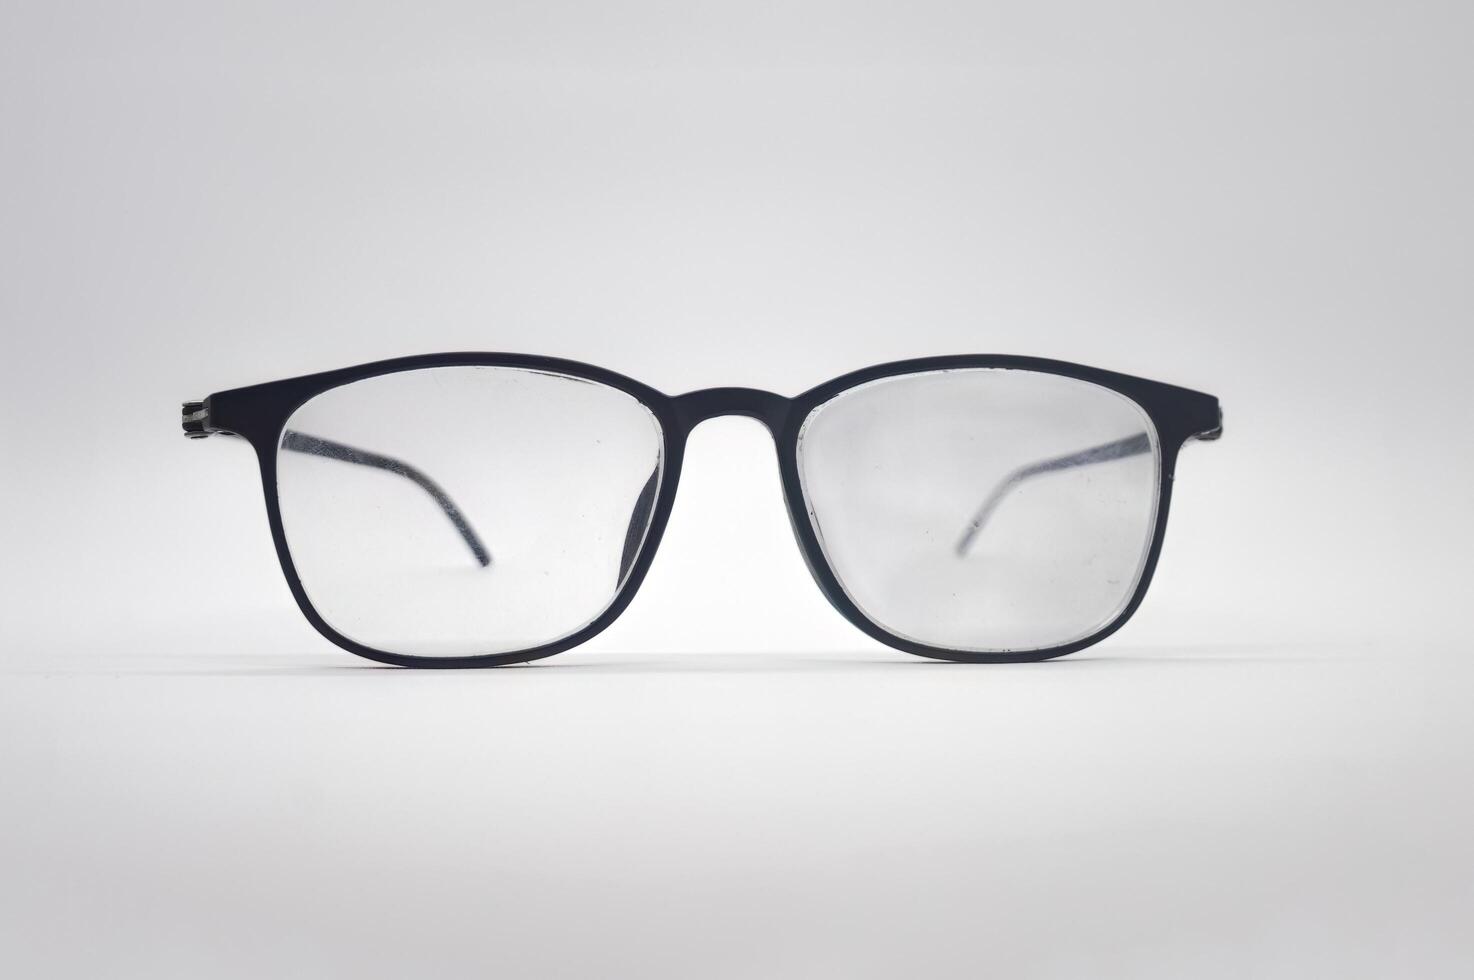 a pair of black men's glasses isolated on a white background photo